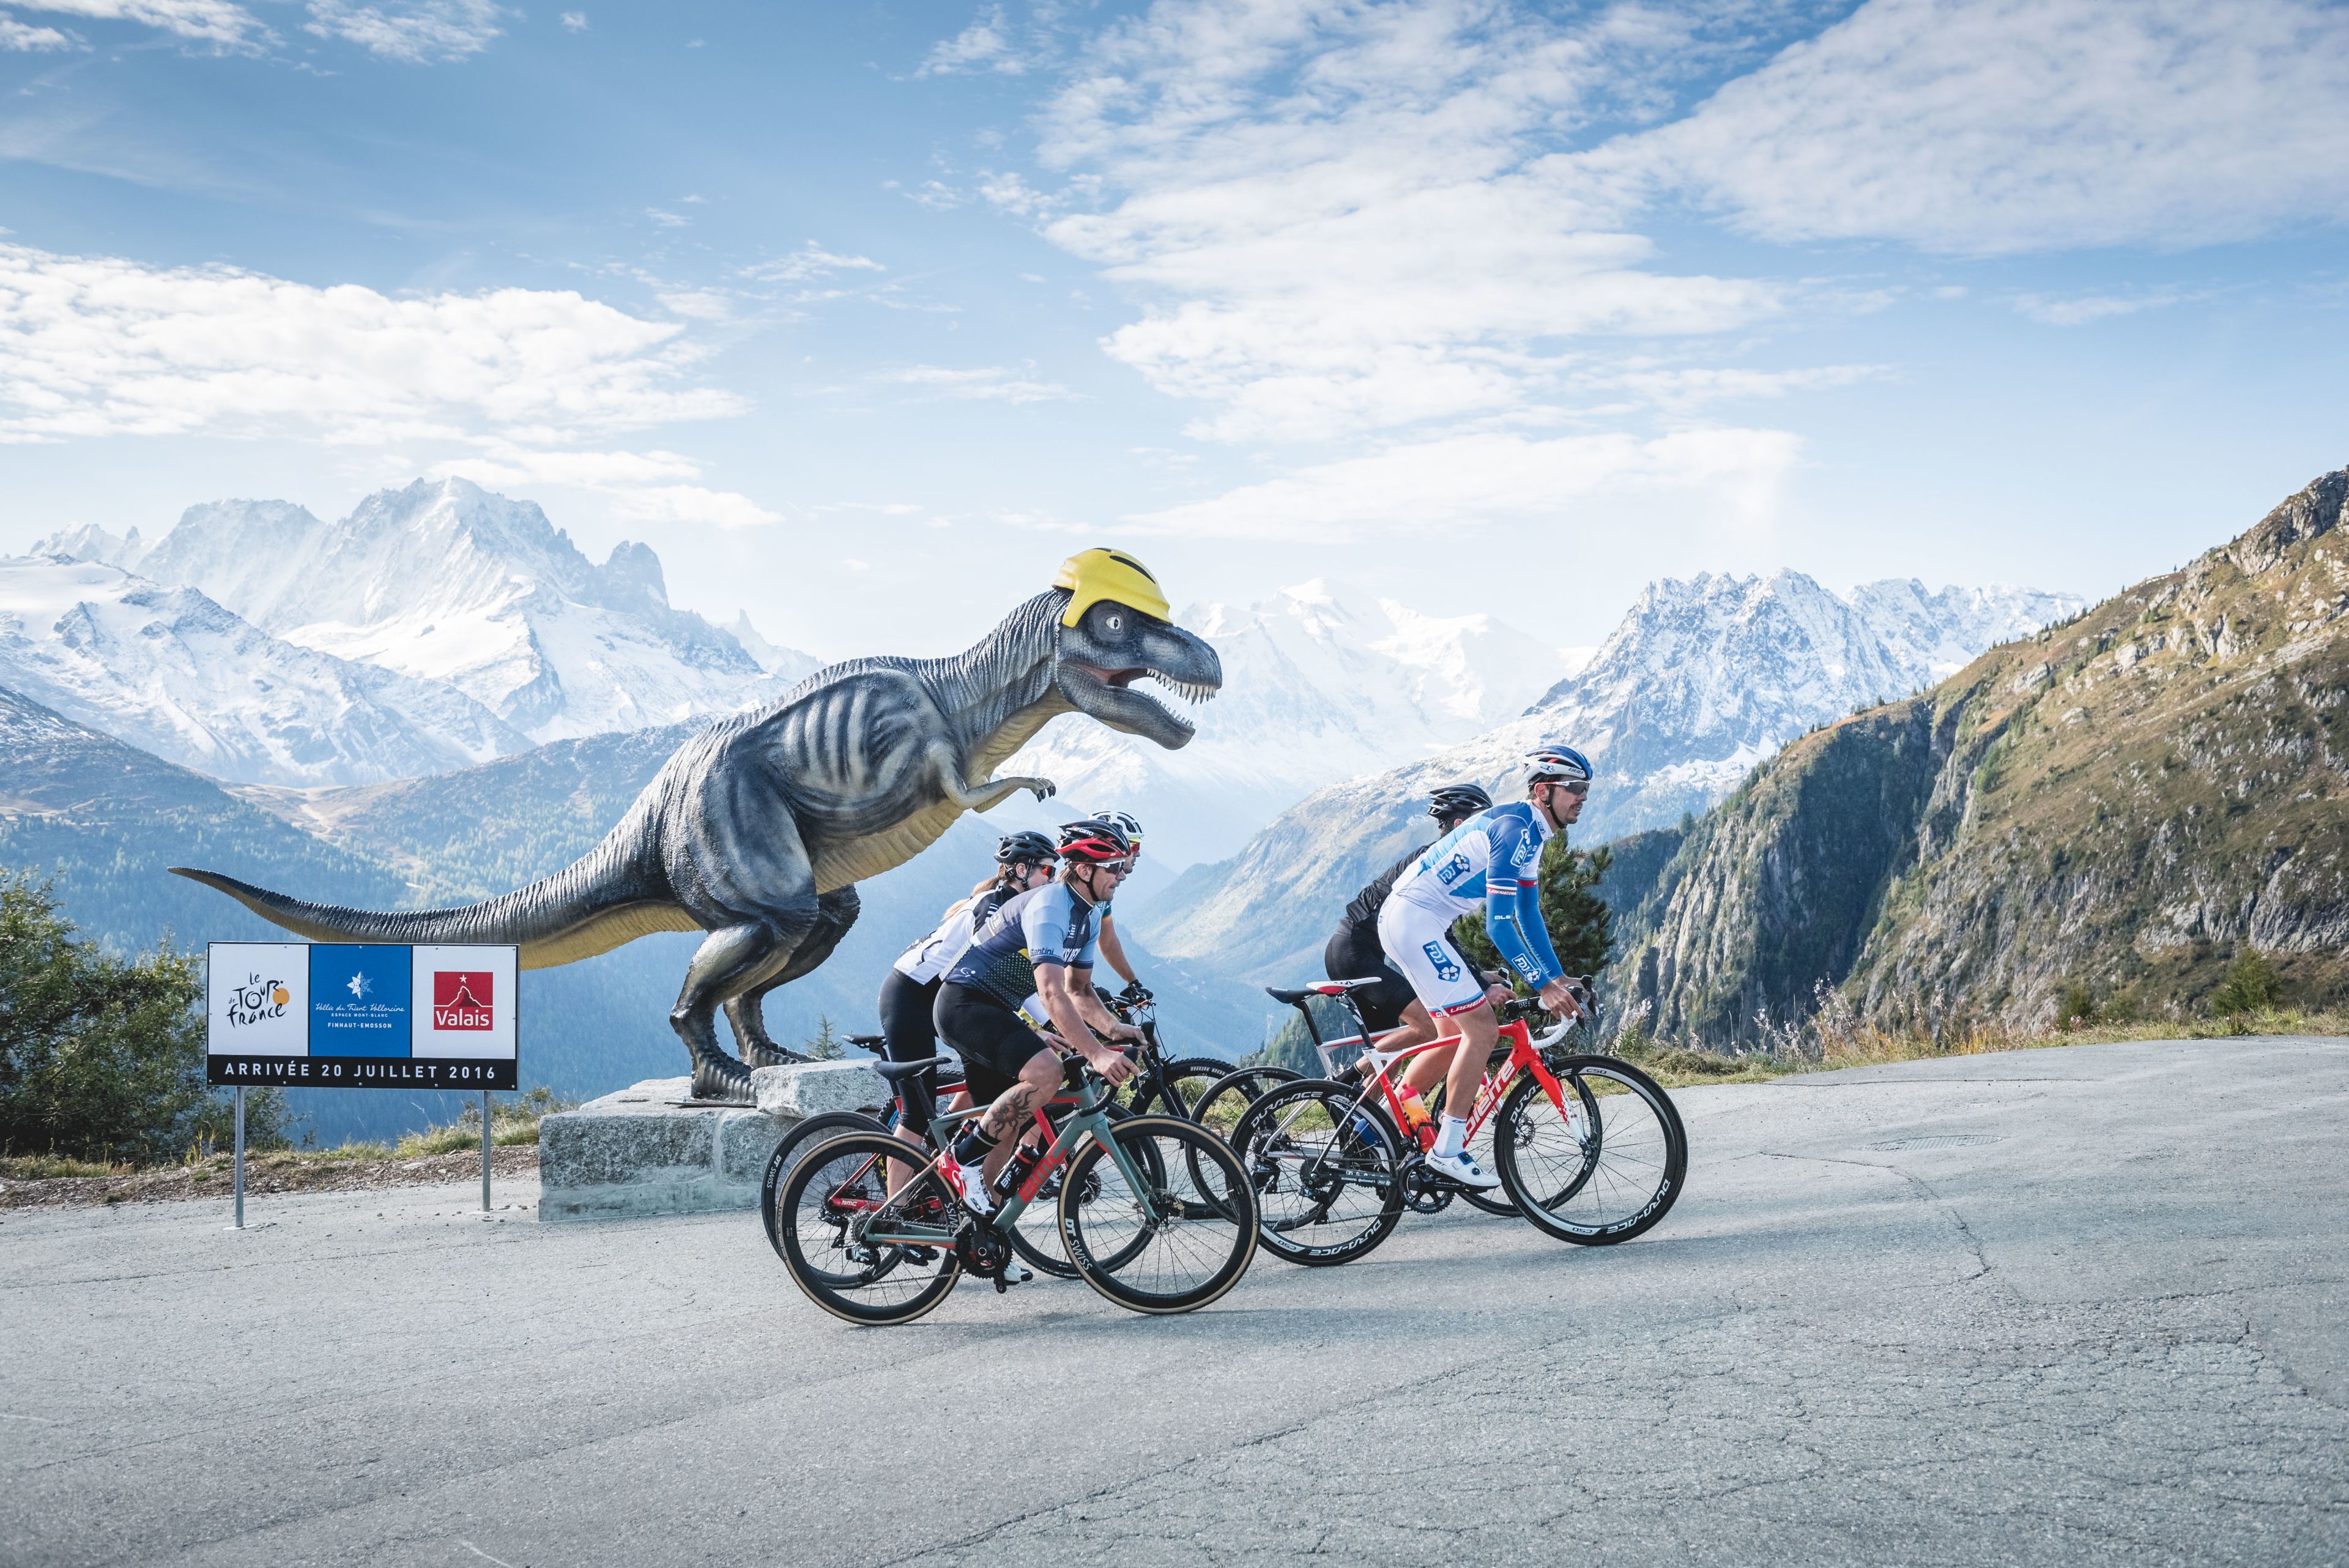 On the tracks of the Tour de France bicycle 
dinosaurs 
mountains Valais Wallis Schweiz Switzerland Suisse